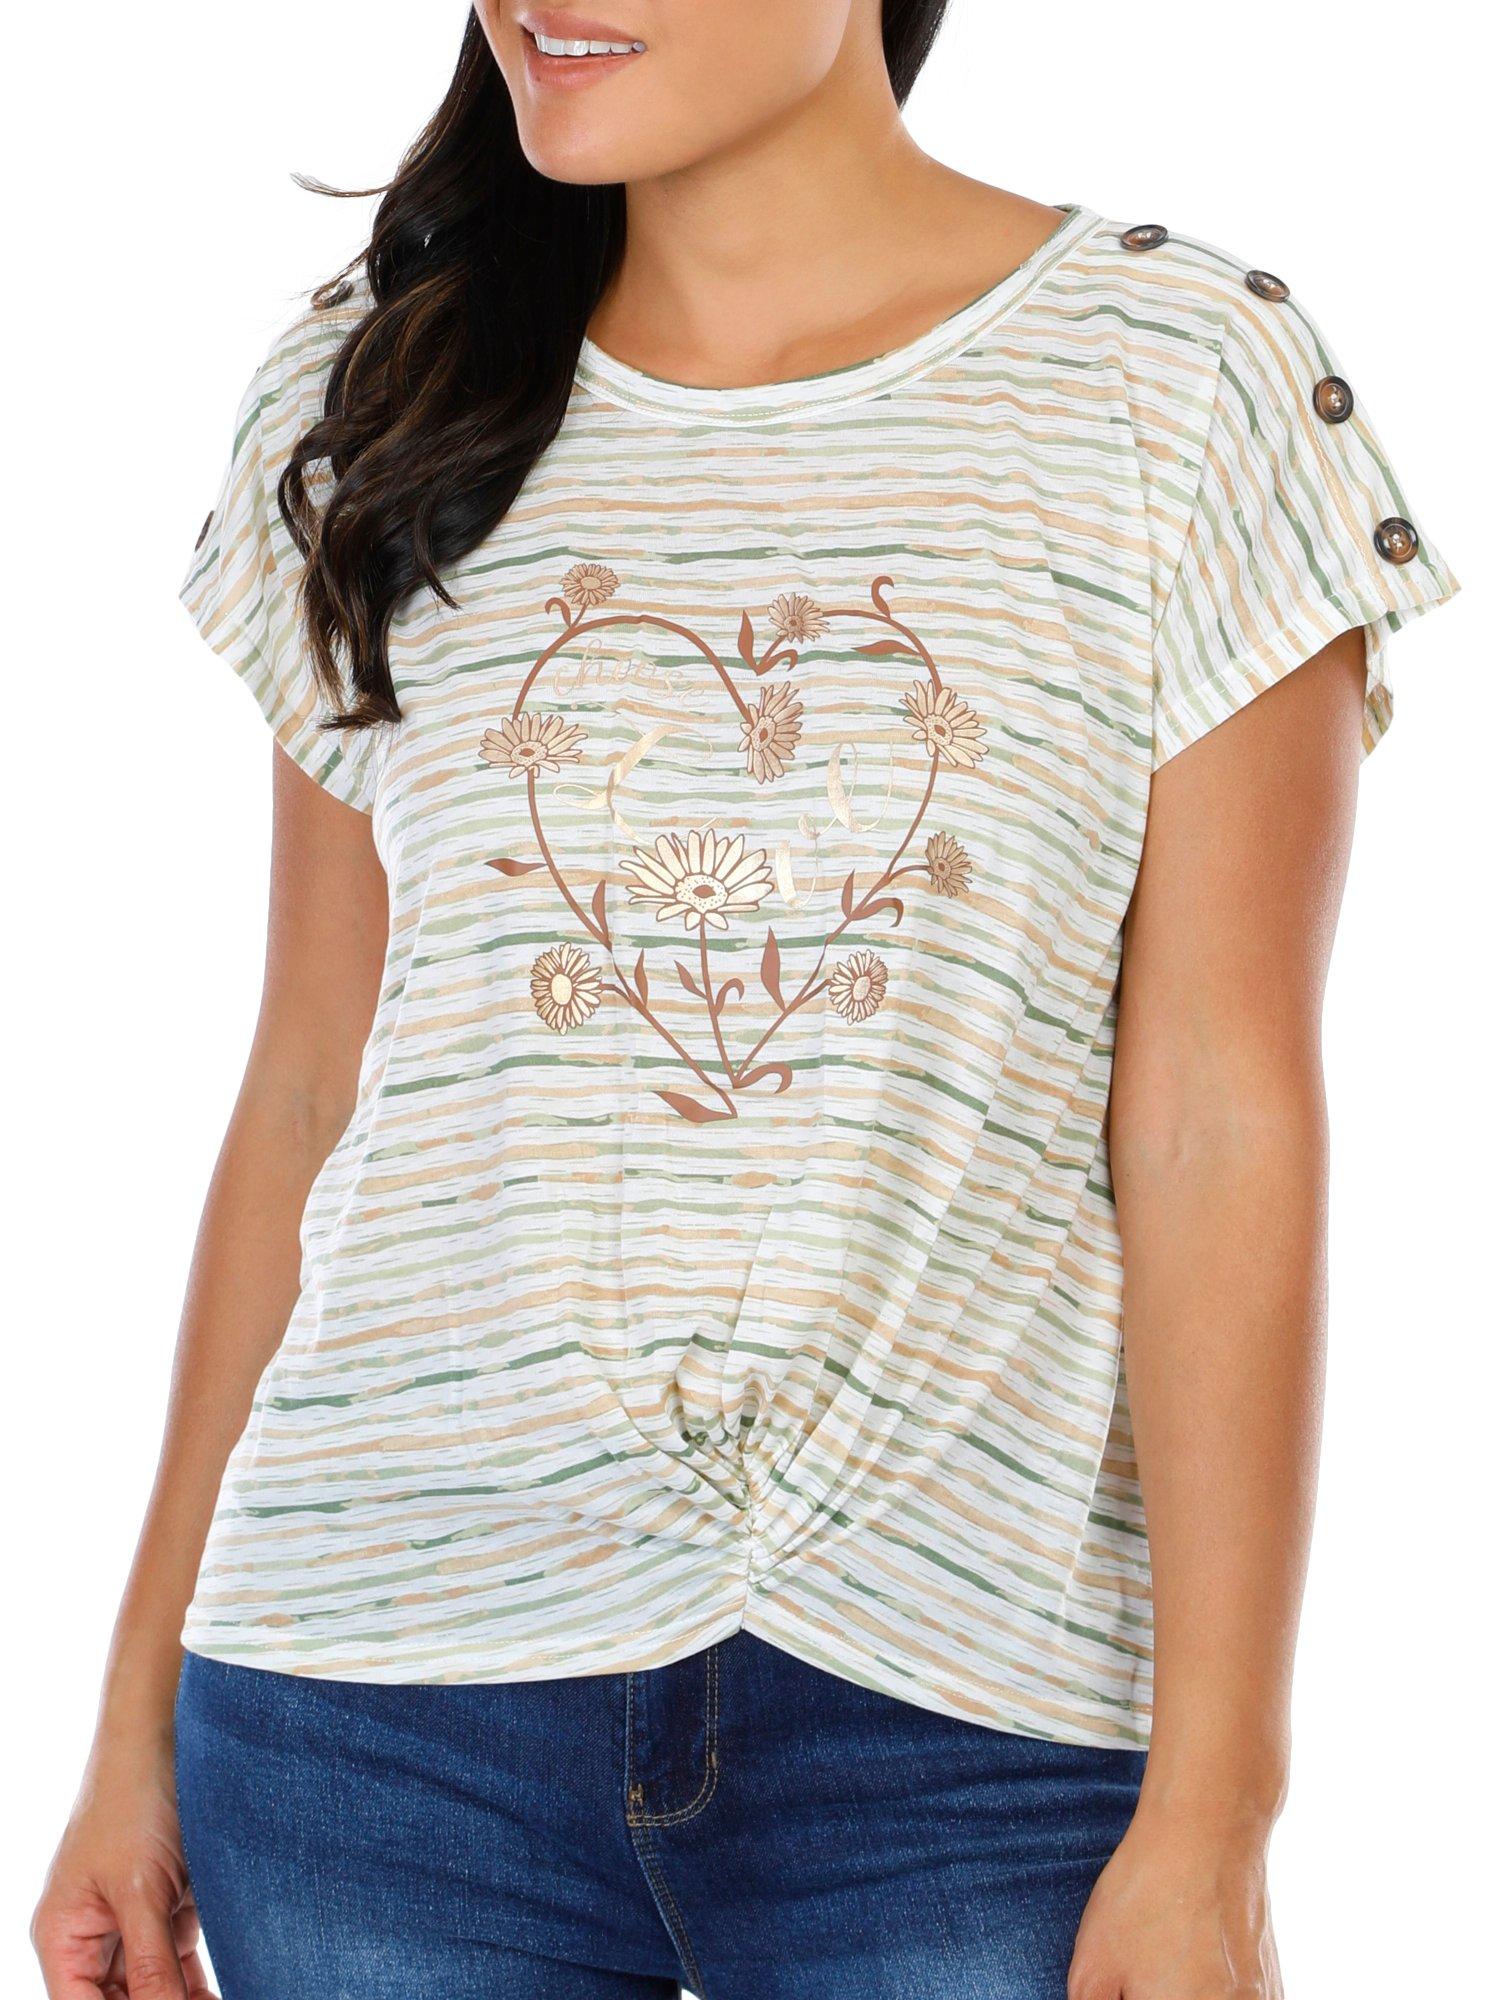 Women's Striped Graphic Short Sleeve Top